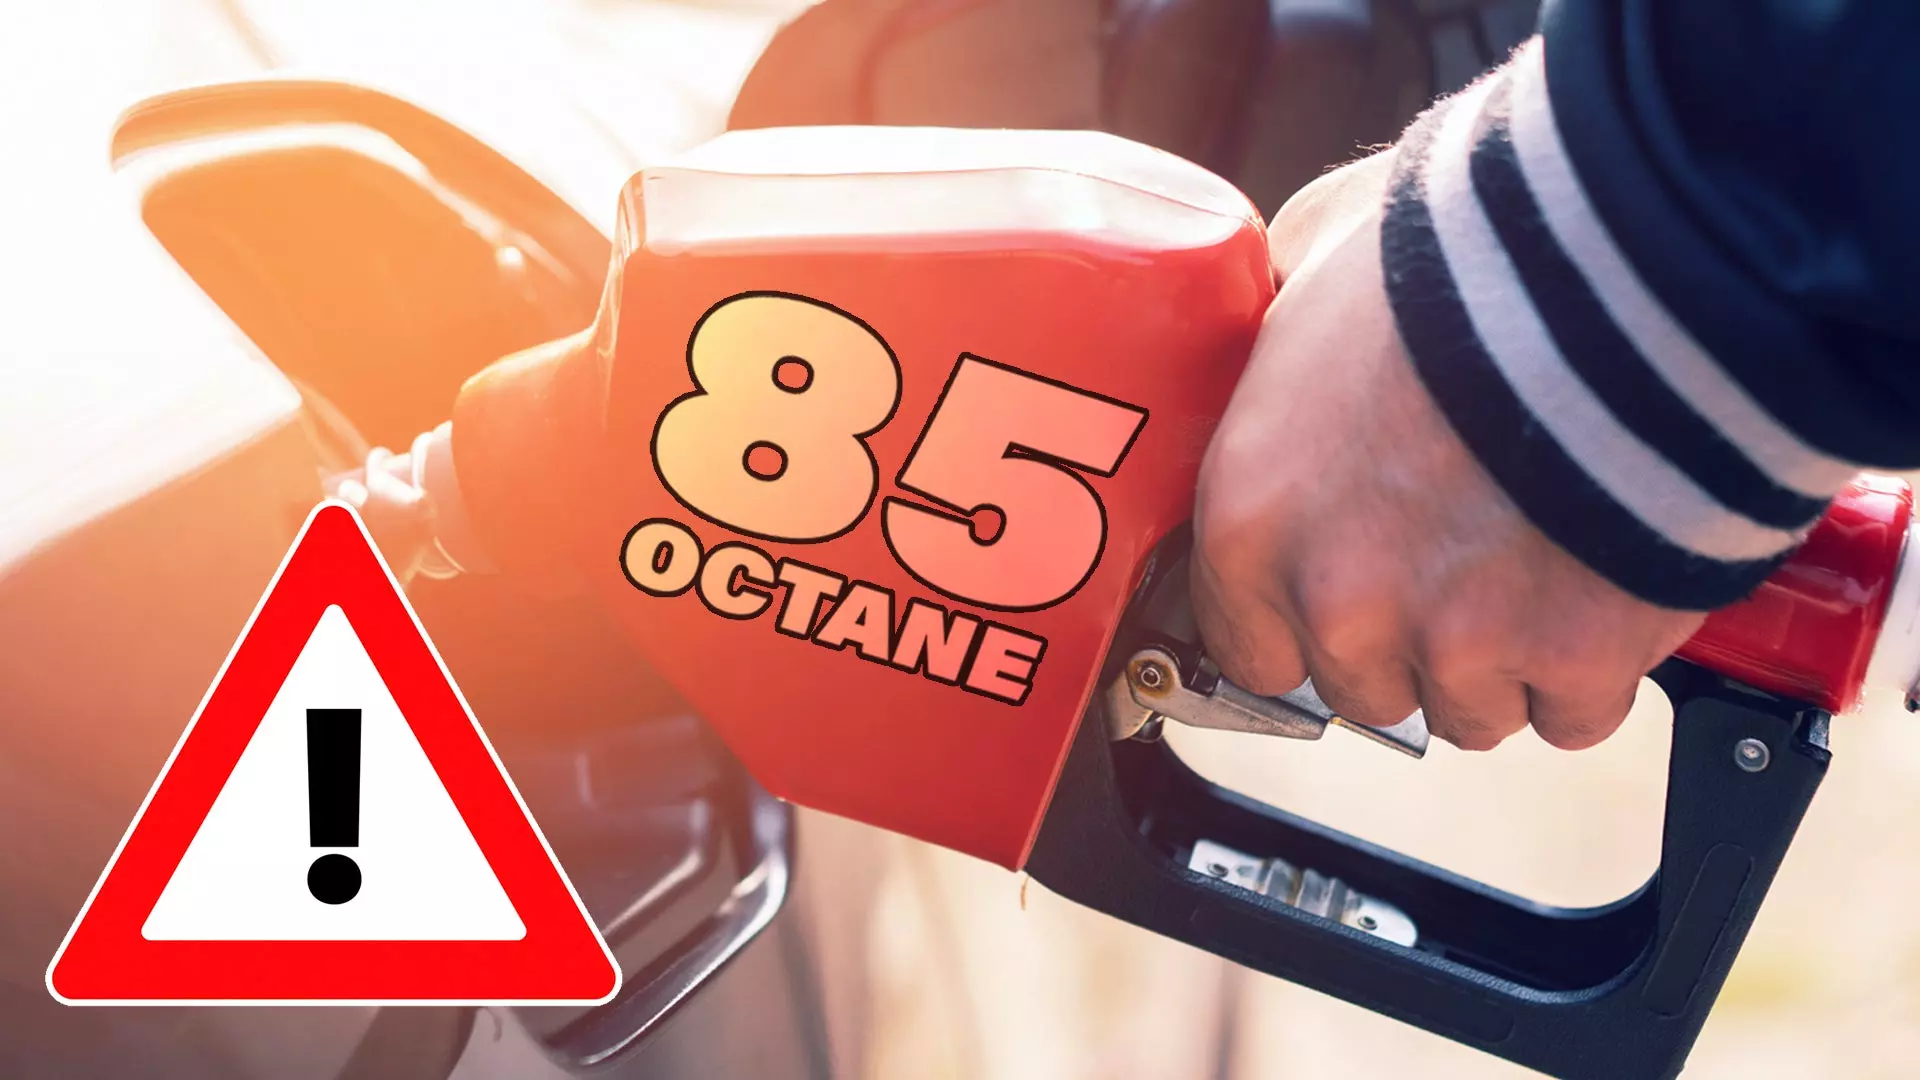 Engineering Explained Stopped Me From Screwing Up a Rental Car&#8217;s Engine With 85 Octane Gas | Autance